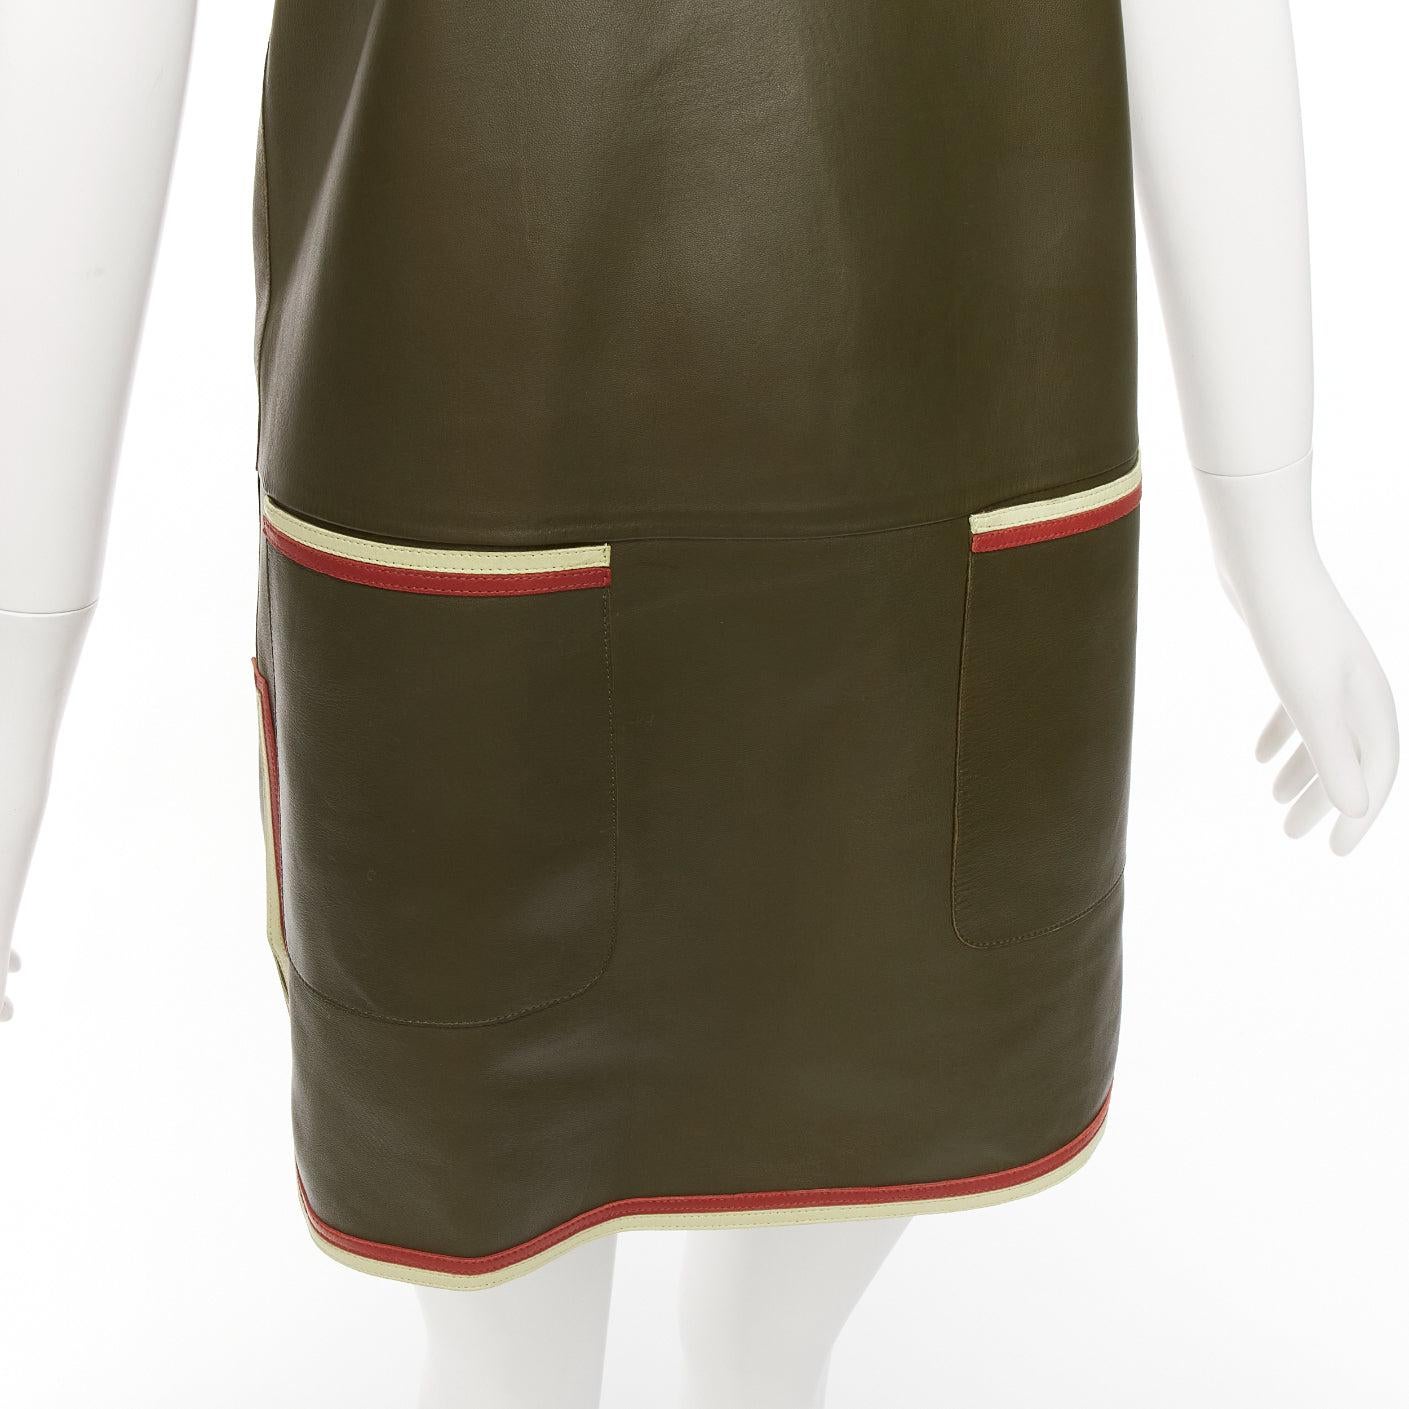 OLD CELINE Phoebe Philo olive green leather red cream trim mod dress FR38 M
Reference: NILI/A00031
Brand: Celine
Designer: Phoebe Philo
Material: Leather
Color: Green, Red
Pattern: Solid
Closure: Zip
Extra Details: Back zip. Panelled bottom.
Made